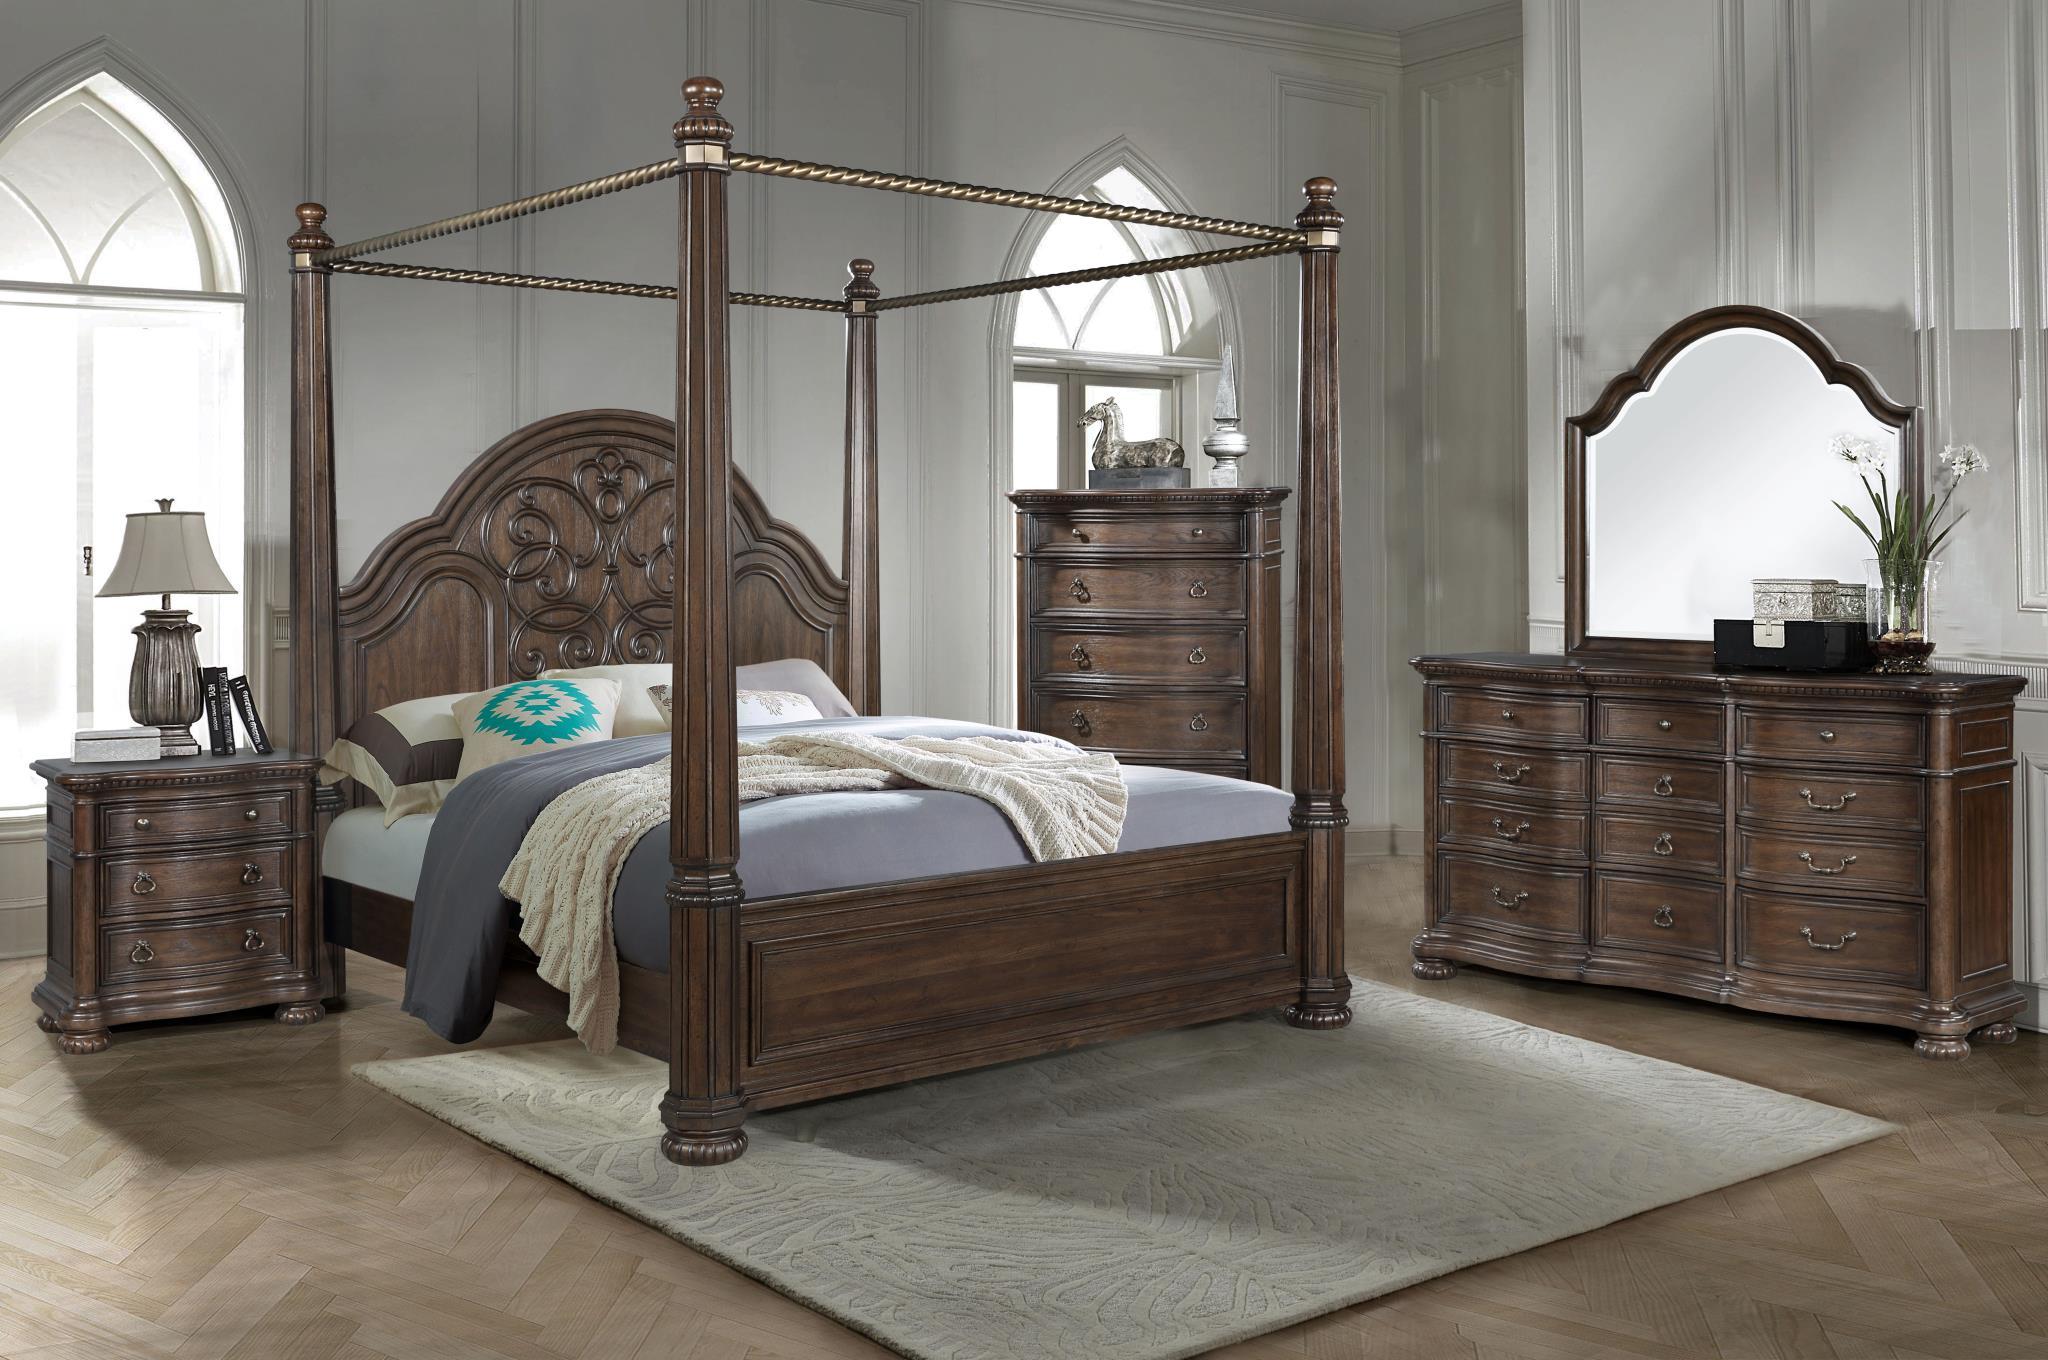 Contemporary, Traditional Bedroom Set TUSCANY 321-113-Set-6 321-113-2NDMC-6PC in Brown 